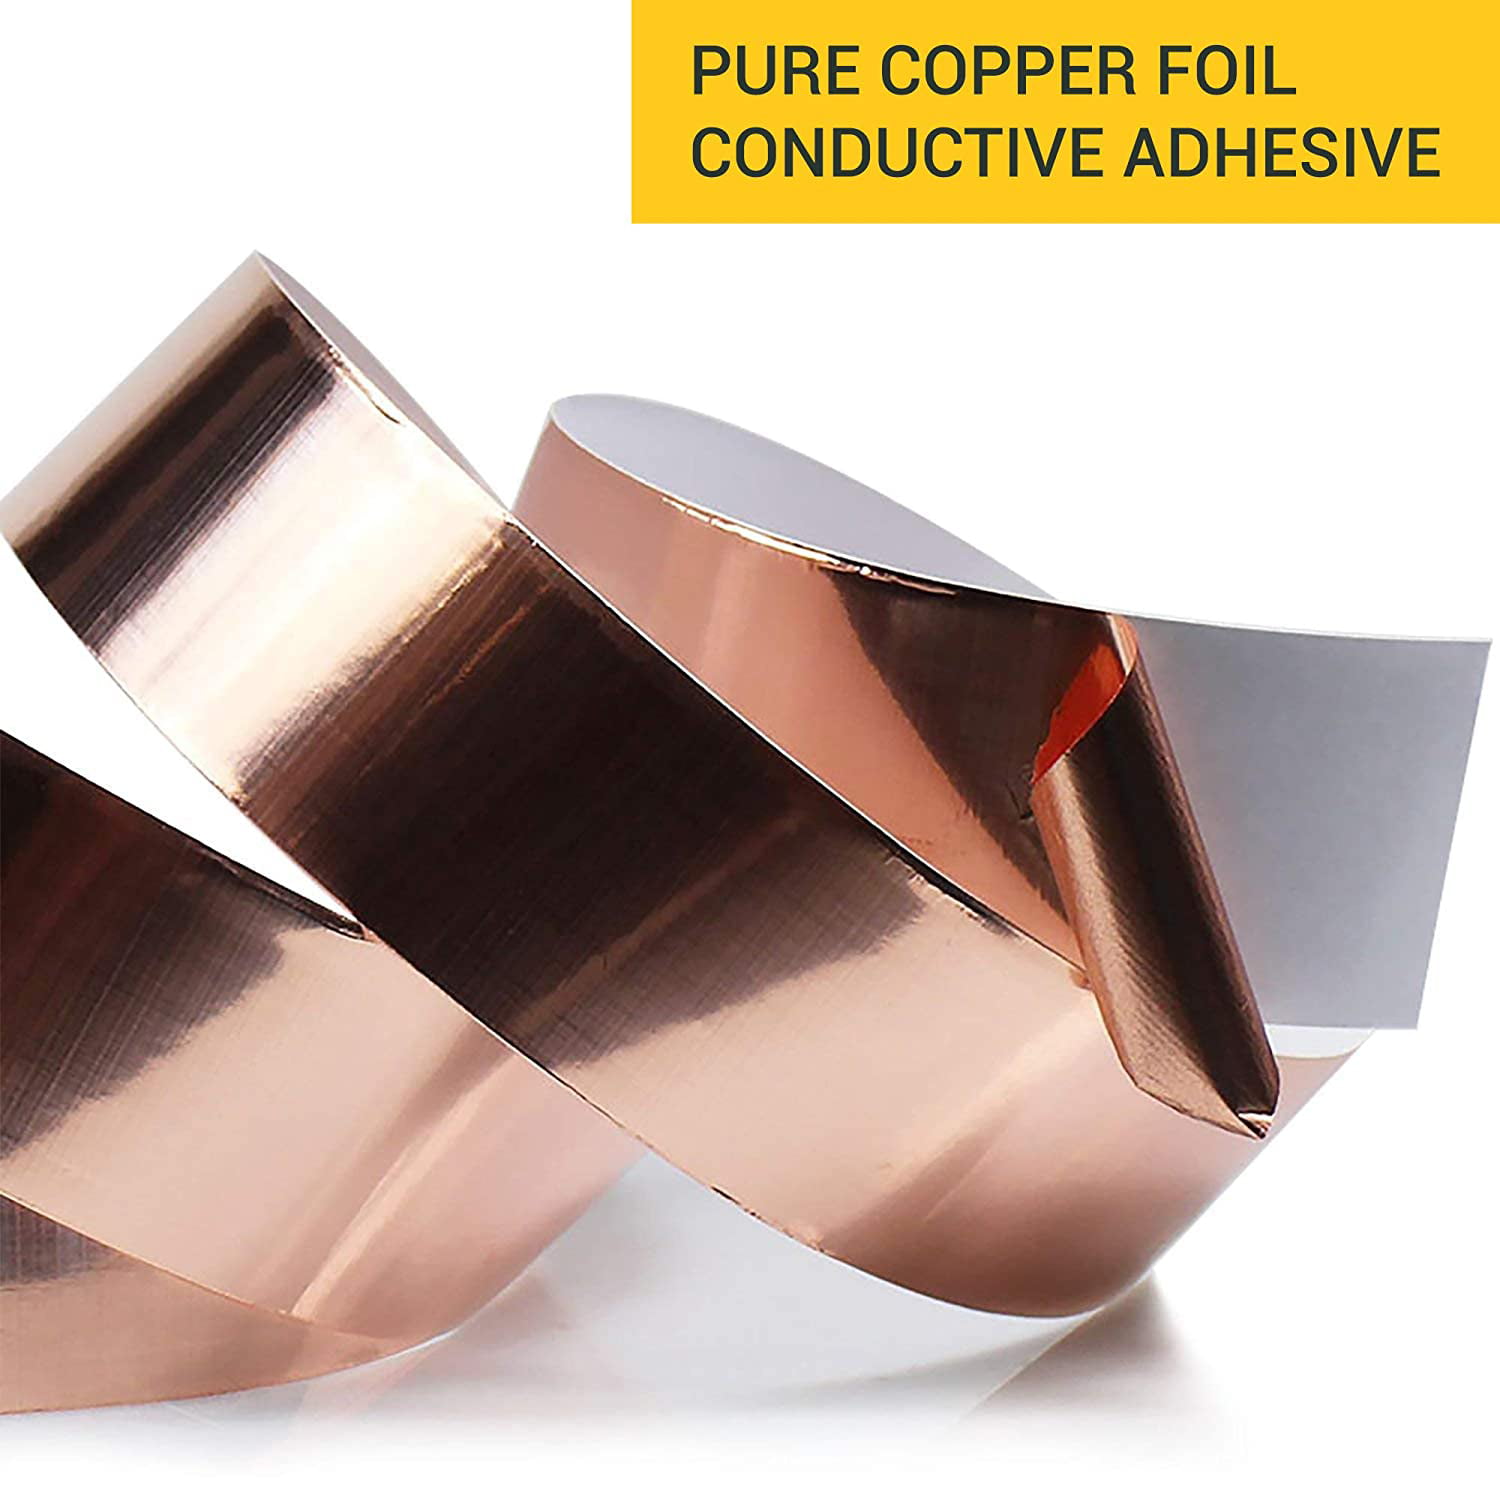 Universally Highly Conductive Strong Adhesive Copper Foil Tape for Guitar Computer Pad Repair VGEBY1 Copper Foil Tape 